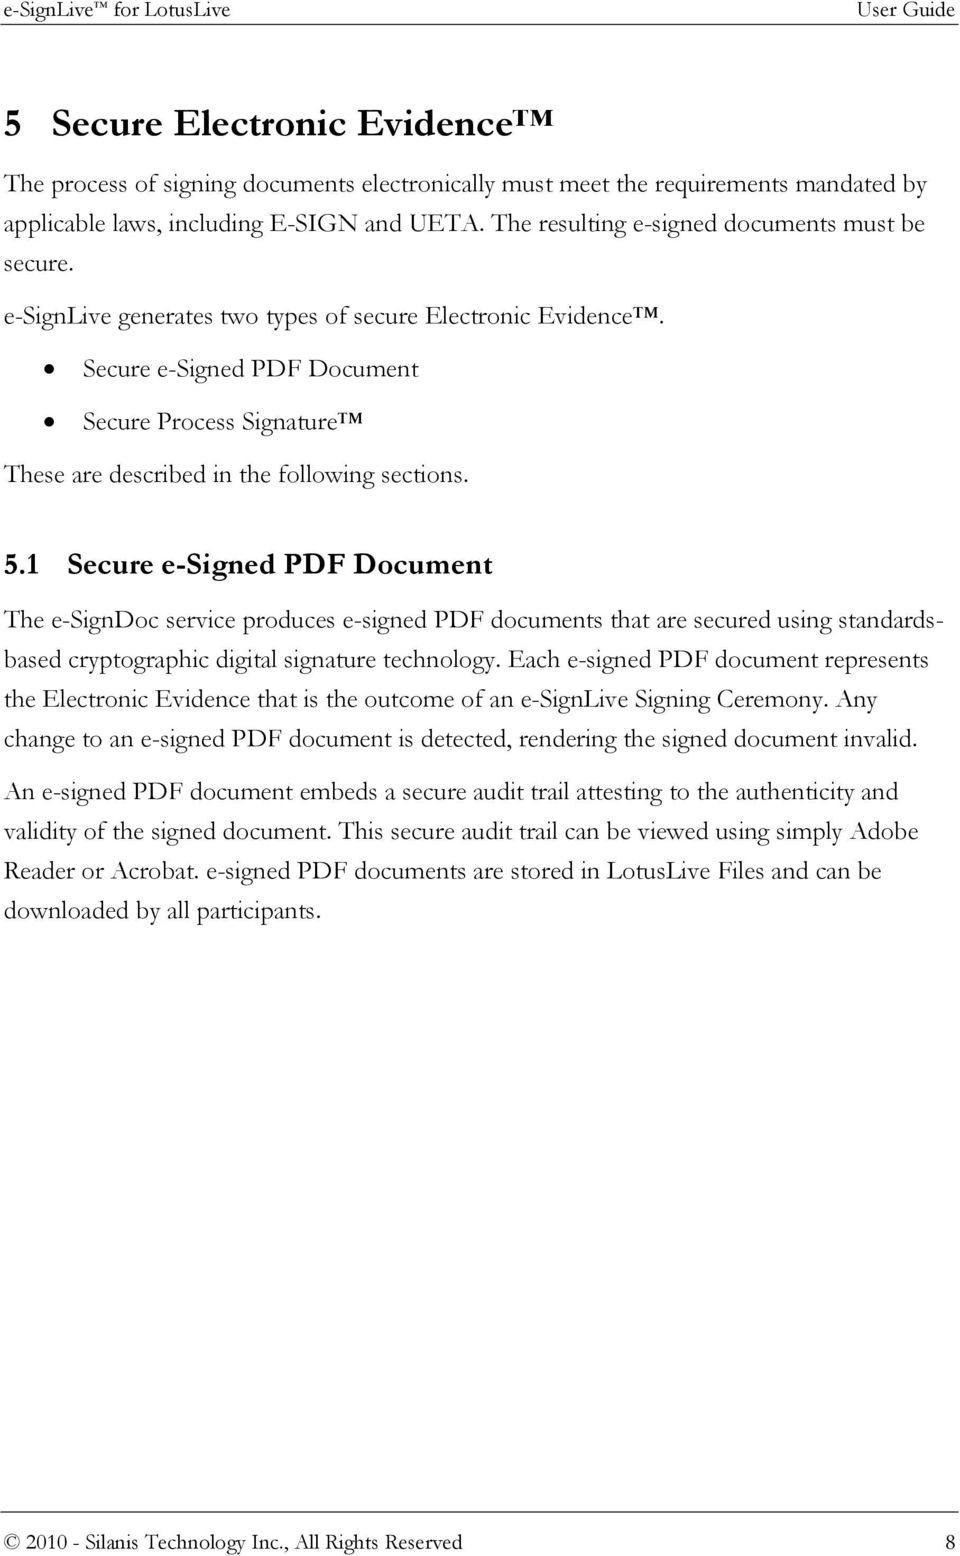 Secure e-signed PDF Document Secure Process Signature These are described in the following sections. 5.